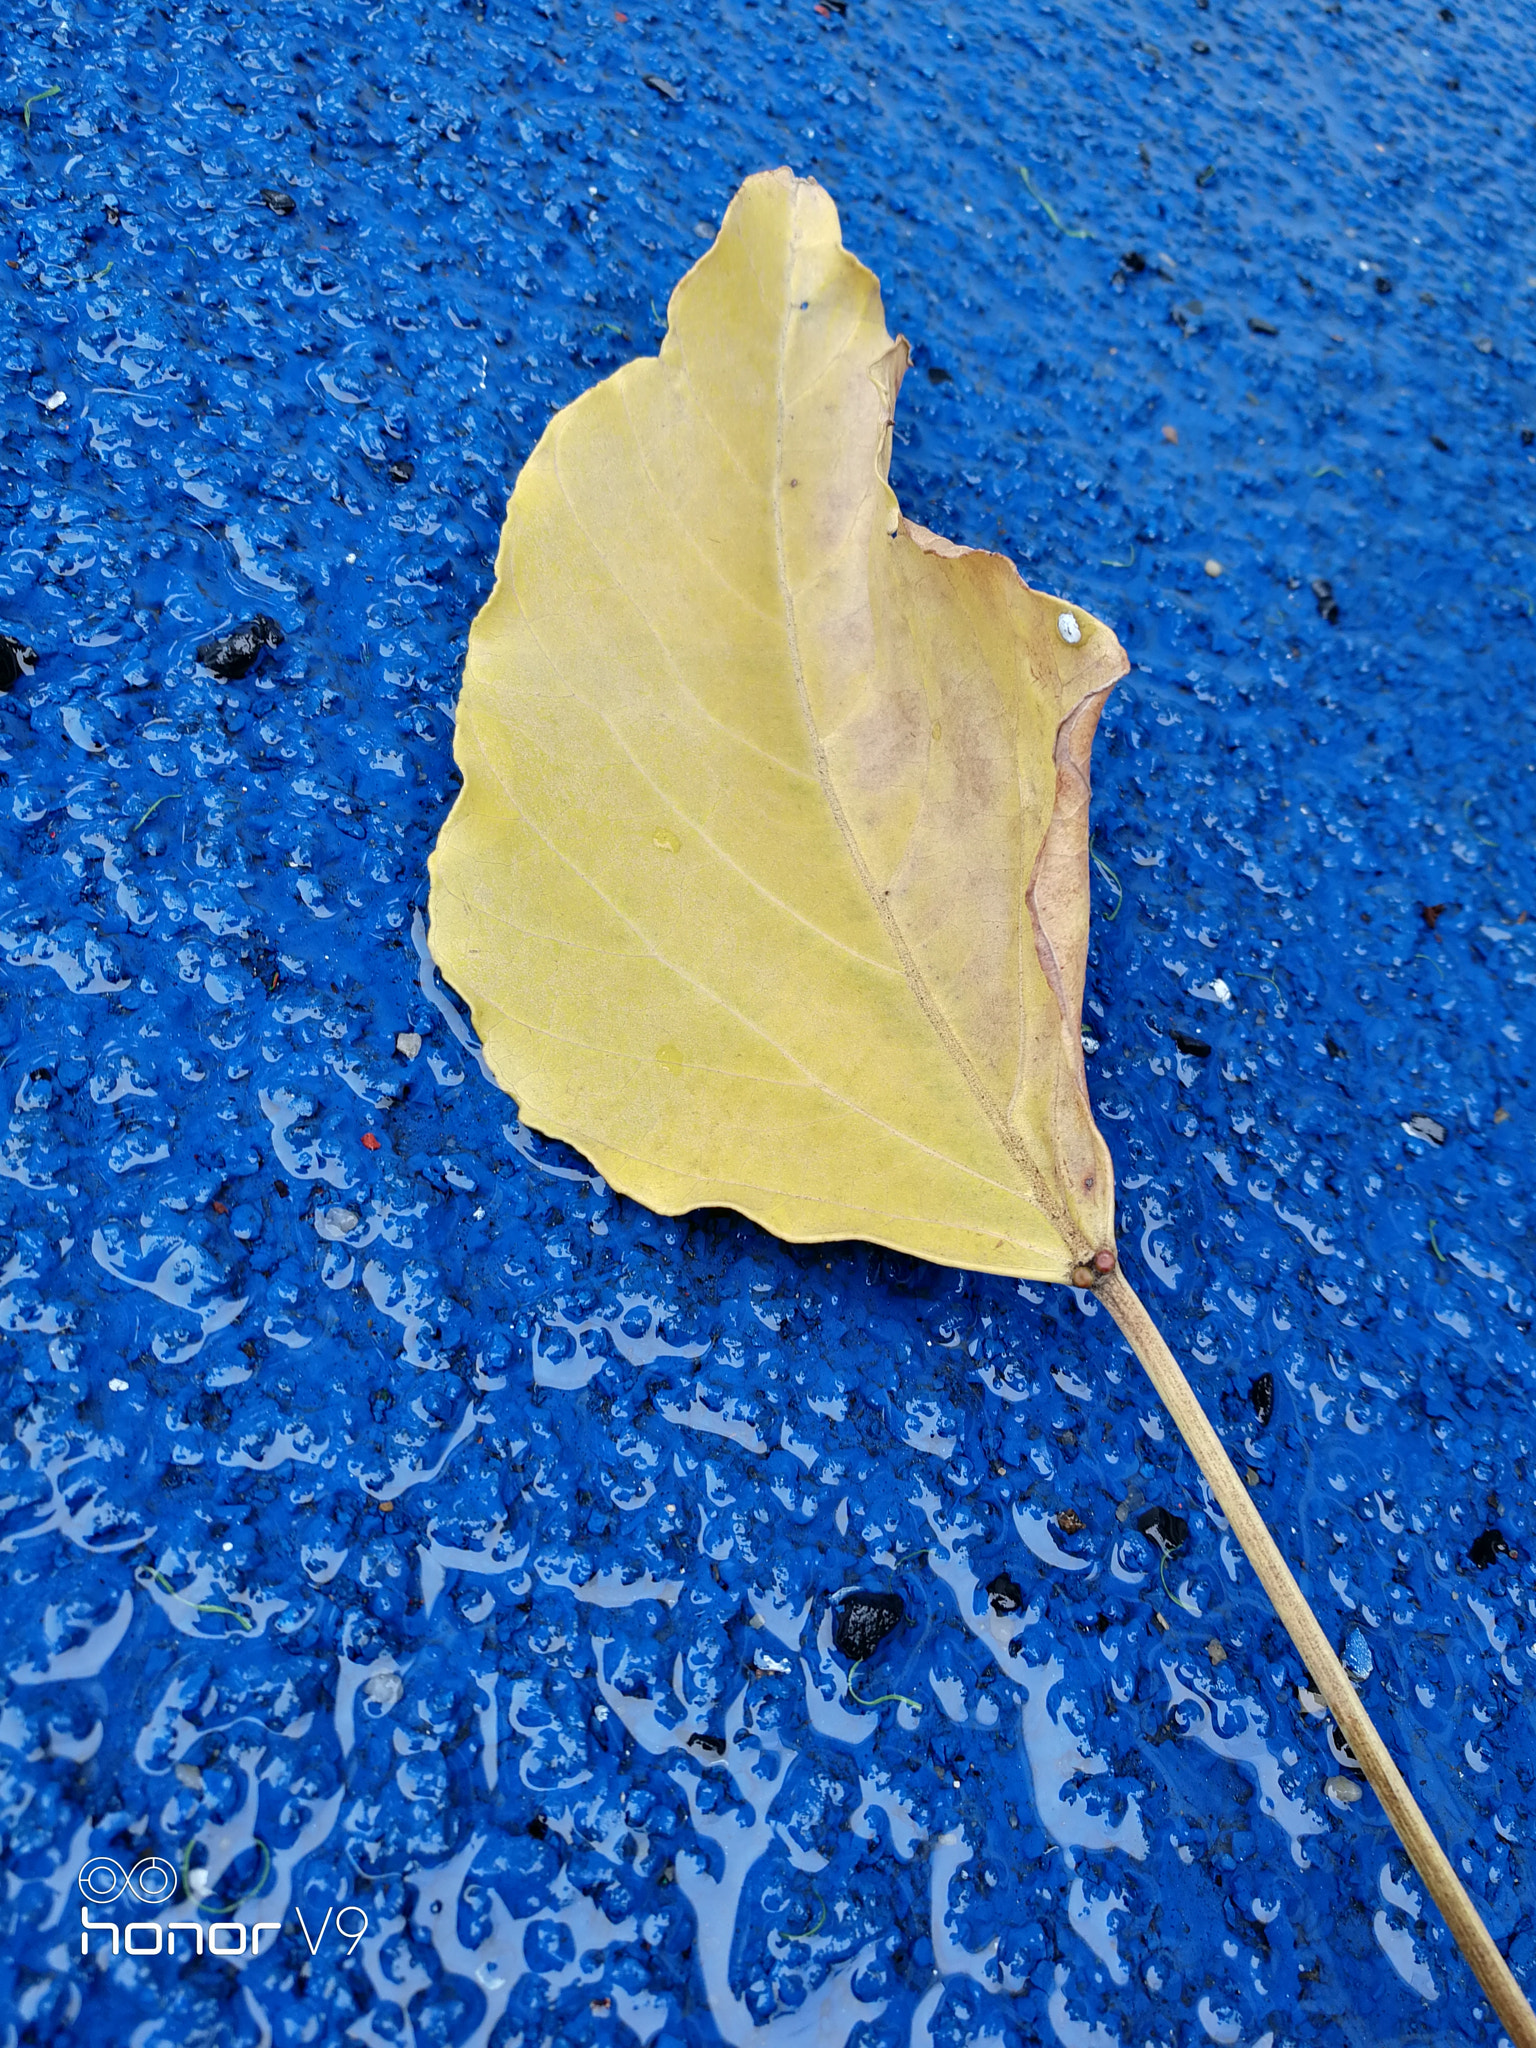 HUAWEI Honor V9 sample photo. Yellow and blue photography